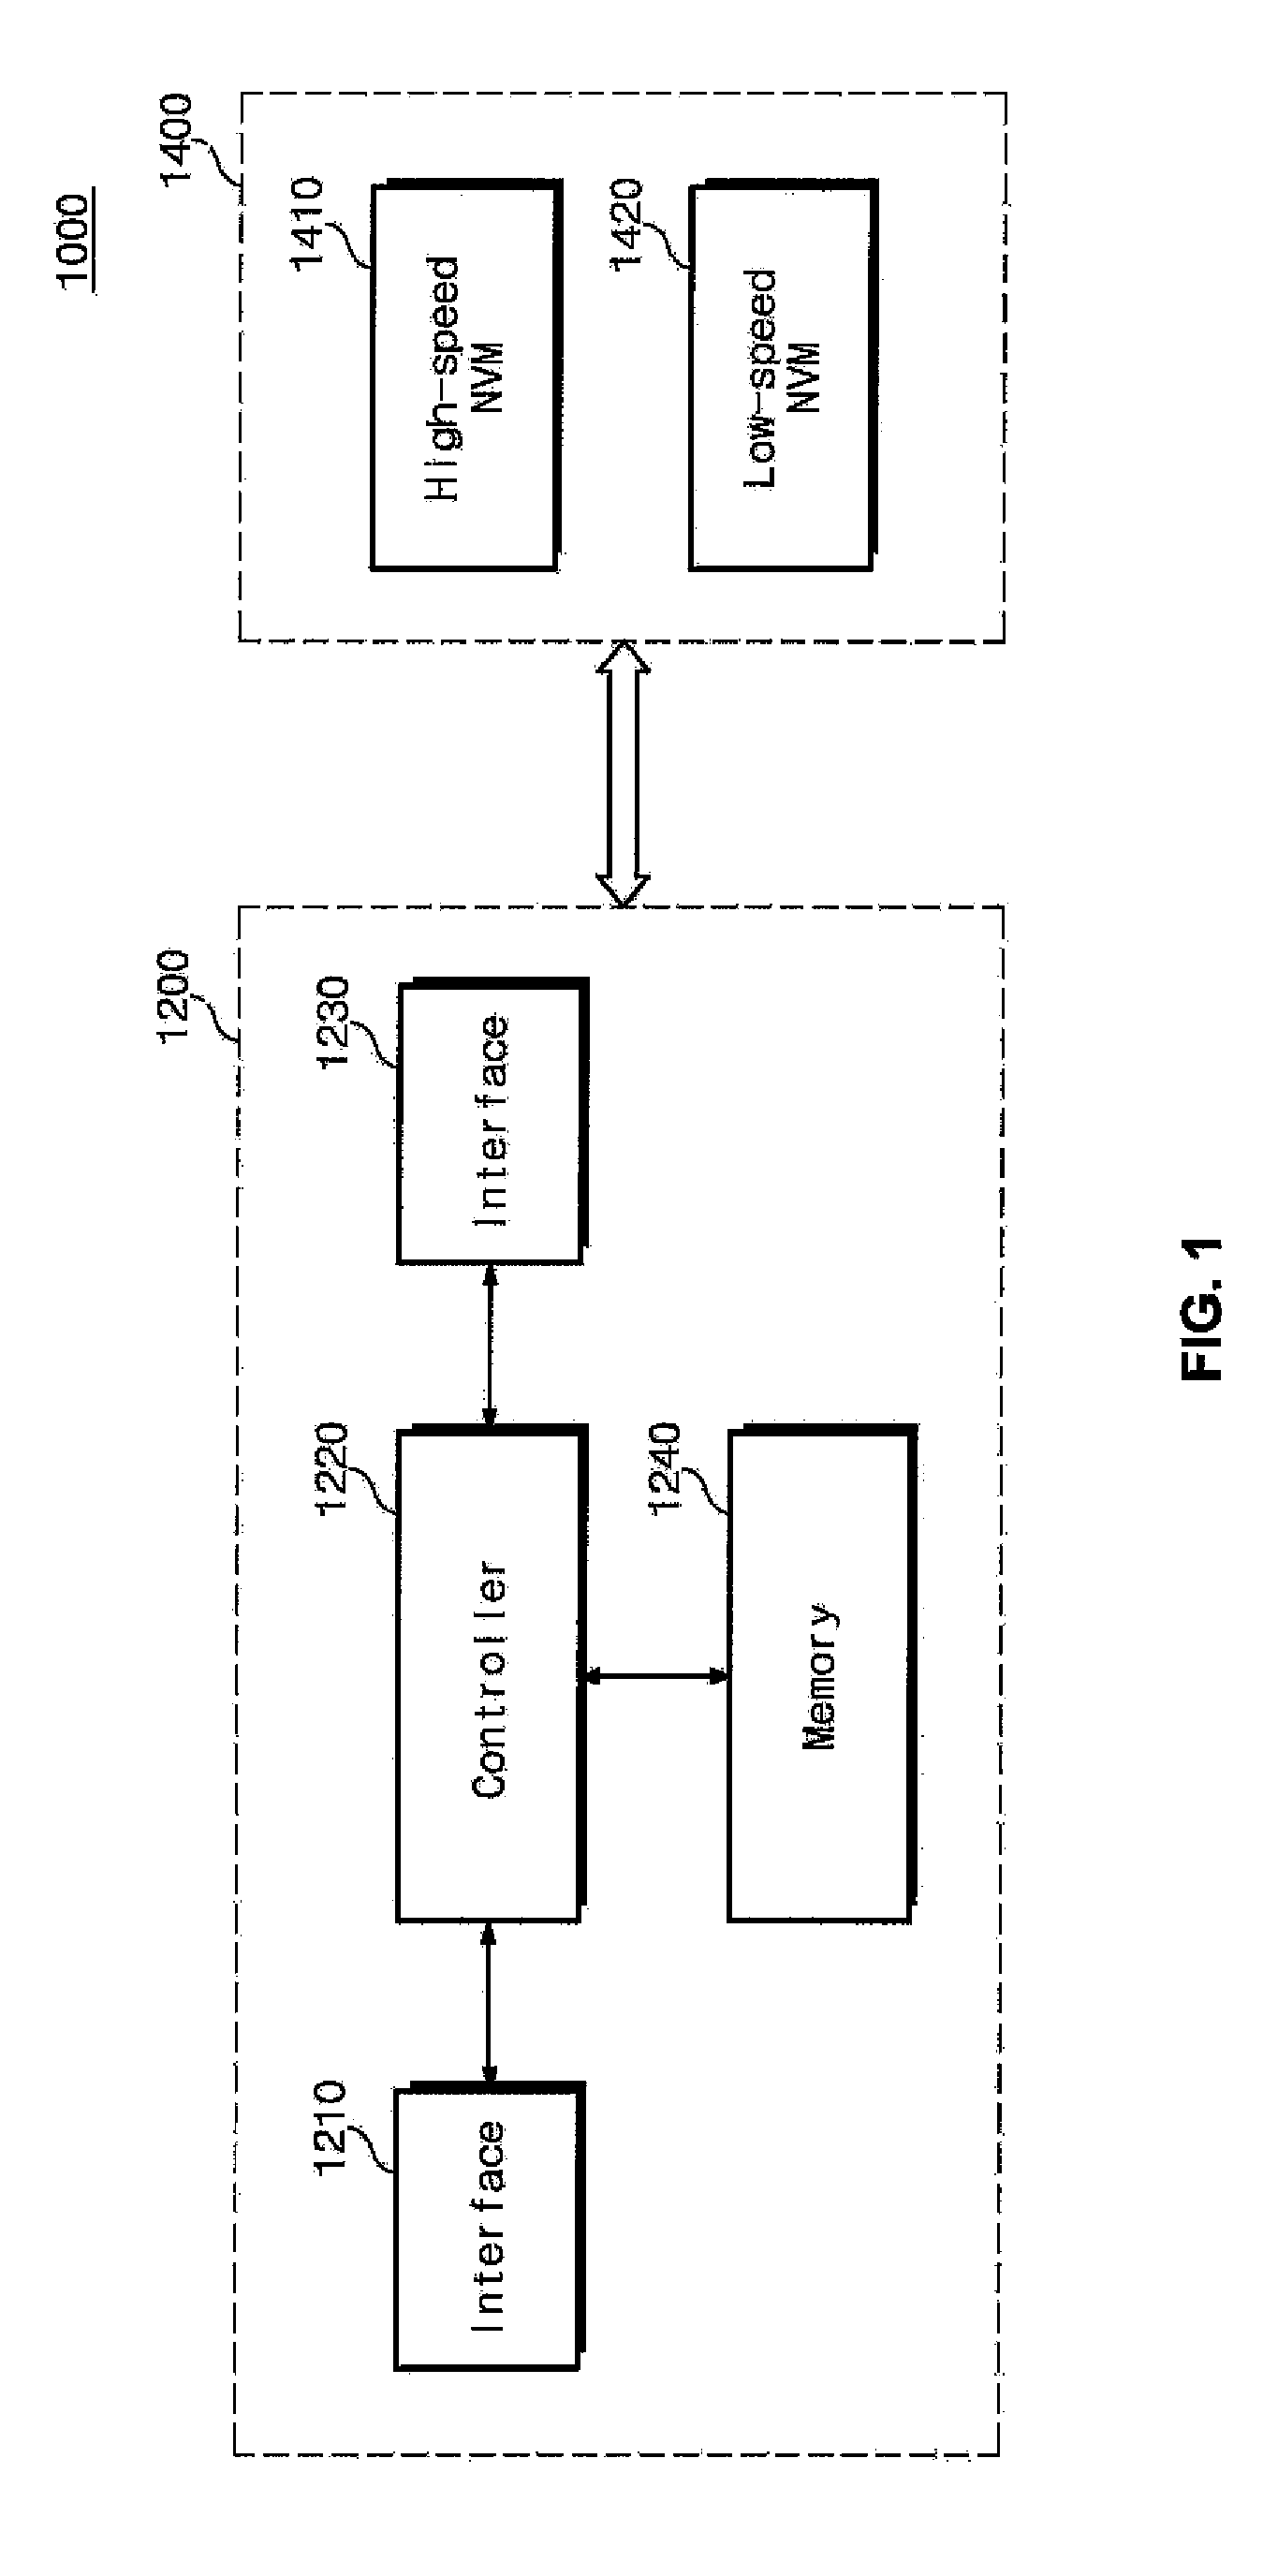 Solid state memory (SSM), computer system including an ssm, and method of operating an ssm